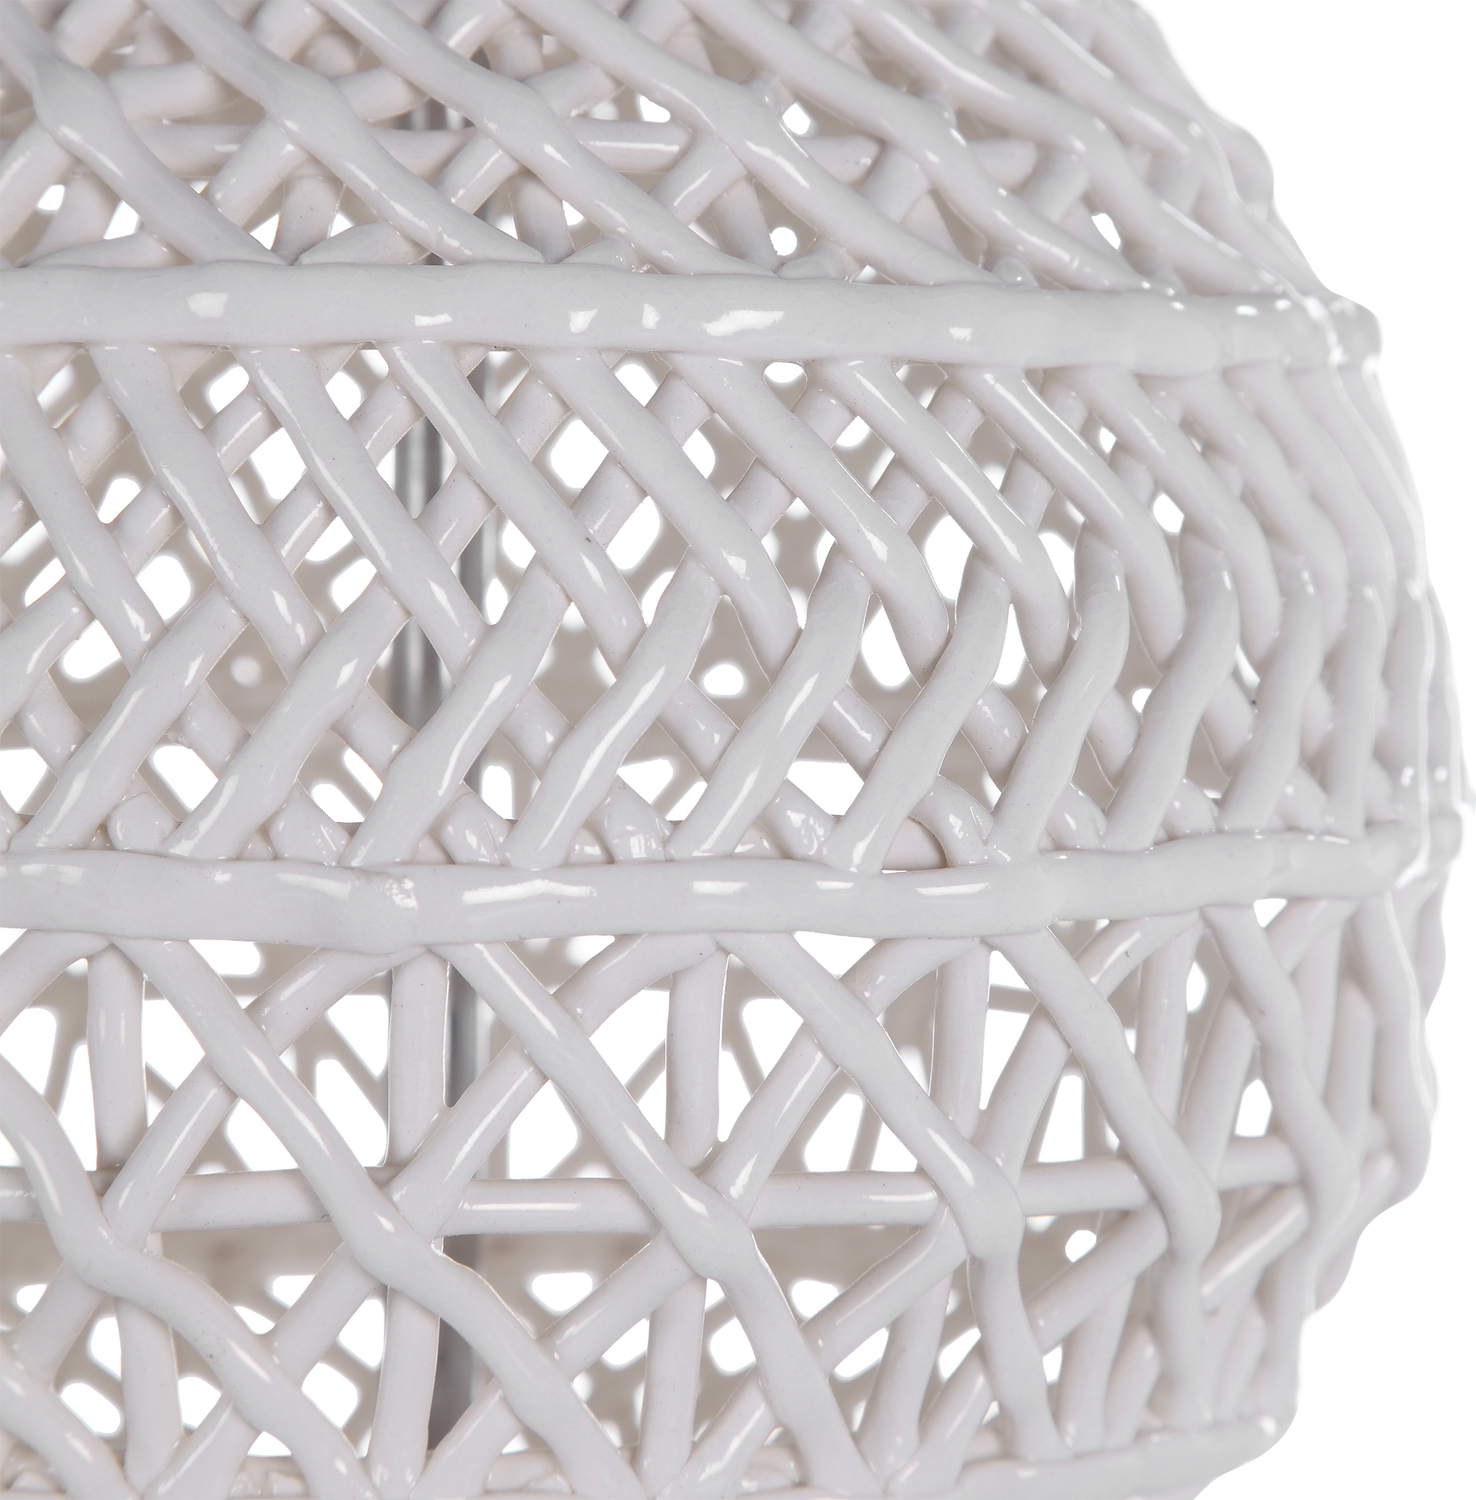 Uttermost Open Ceramic Buffet Lamp Table Lamps This Versatile Buffet Lamp Showcases An Open Ceramic Basket Weave Design In A Gloss White Glaze With Elegant Thick Crystal Details And Polished Nickel Accents.